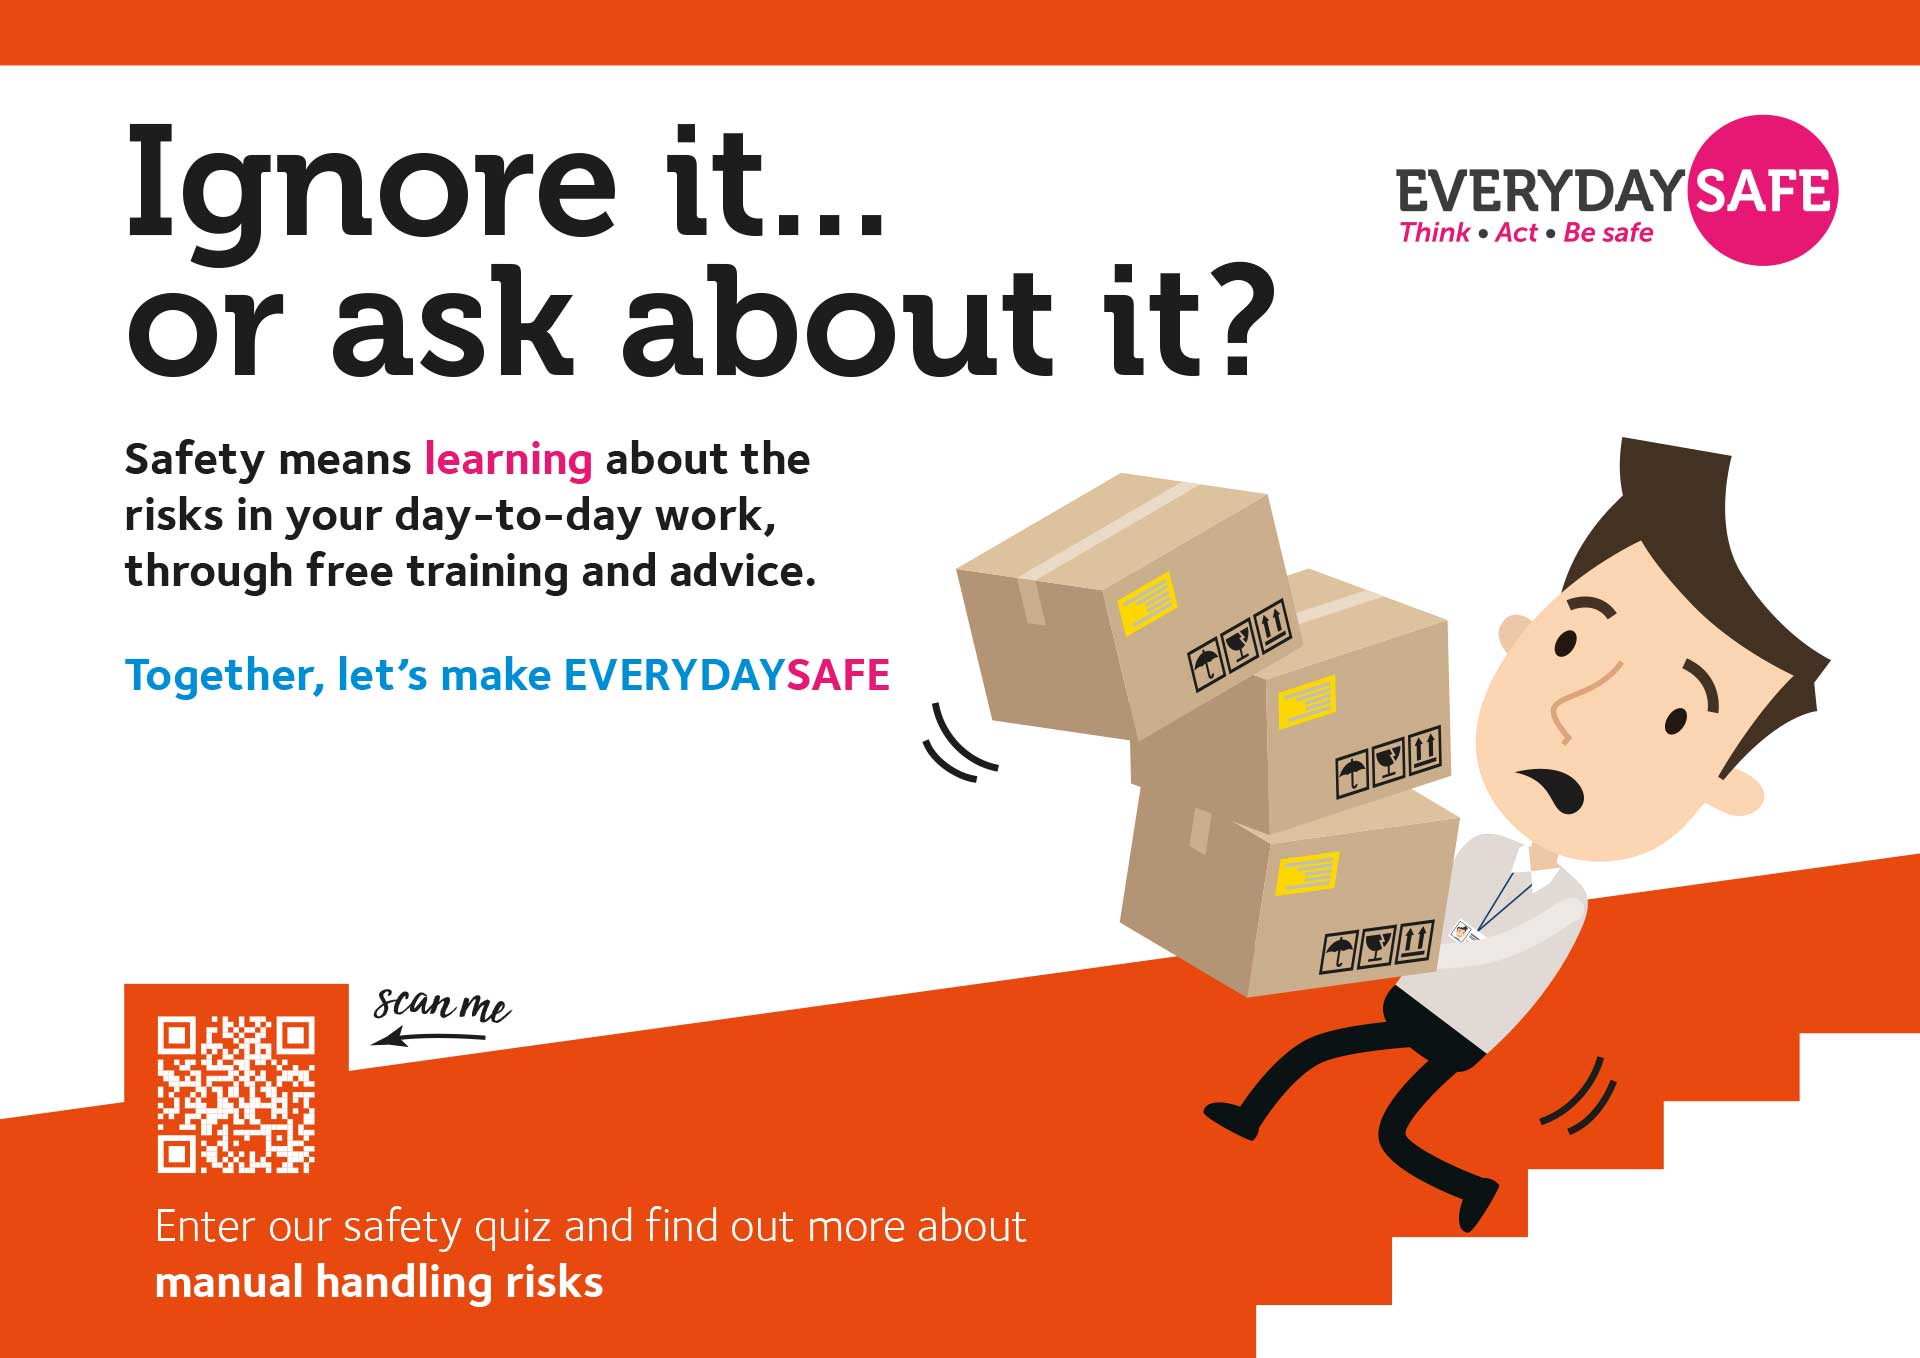 EveryDaySafe poster highlighting the value of learning